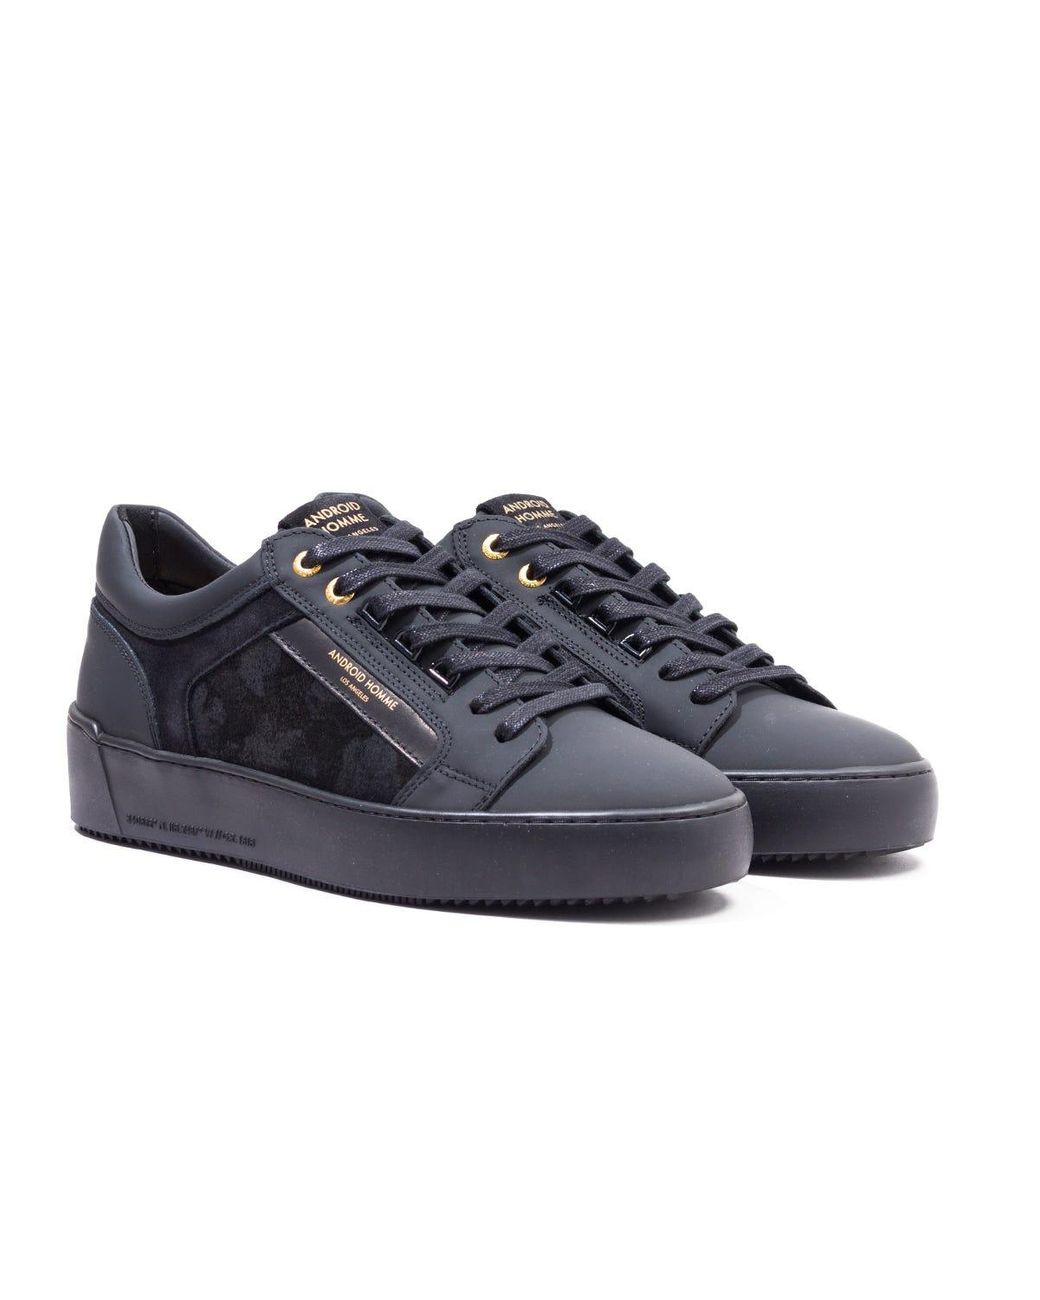 Android Homme Venice Black Camo Suede Leather Trainers for Men | Lyst